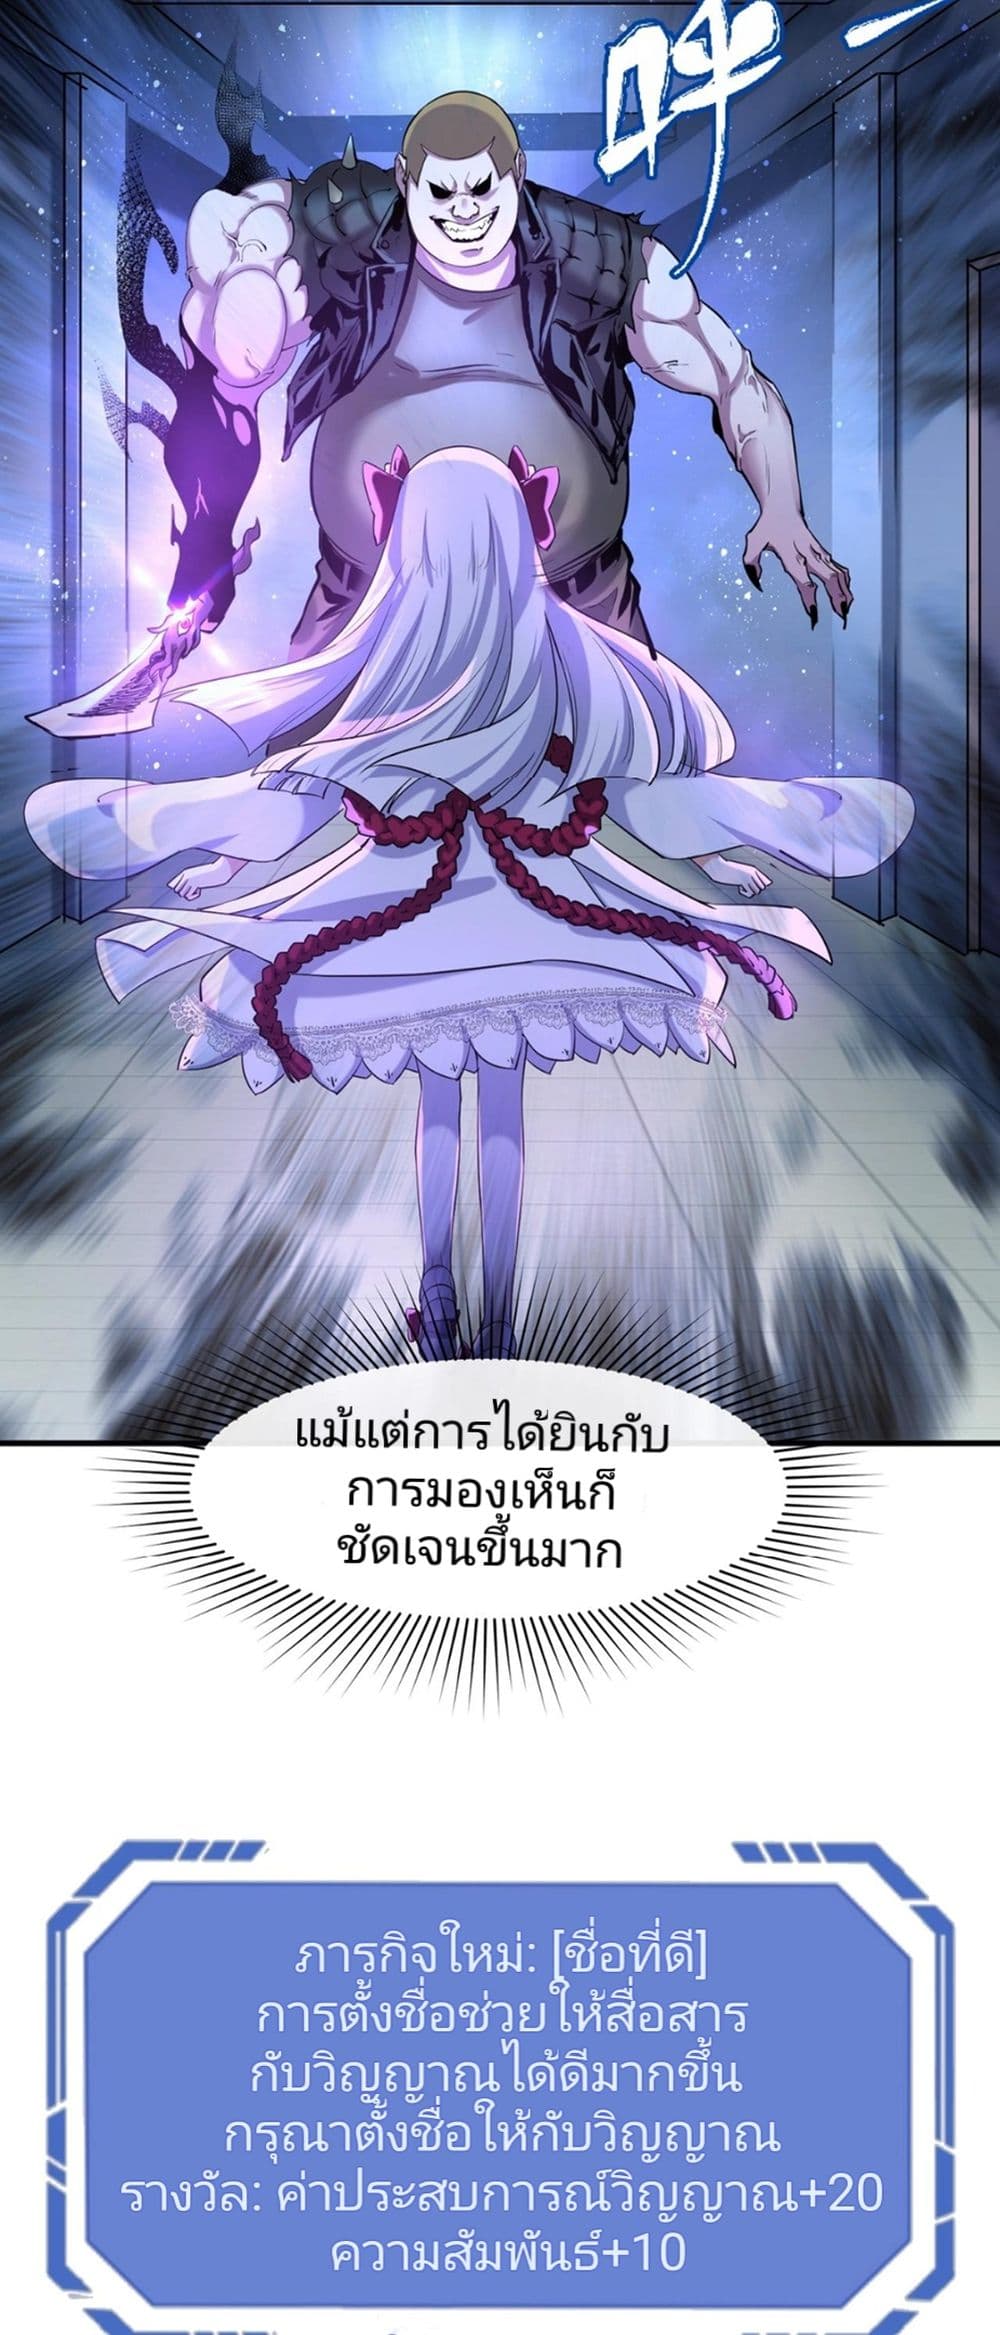 The Age of Ghost Spirits à¸à¸­à¸à¸à¸µà¹ 2 (7)